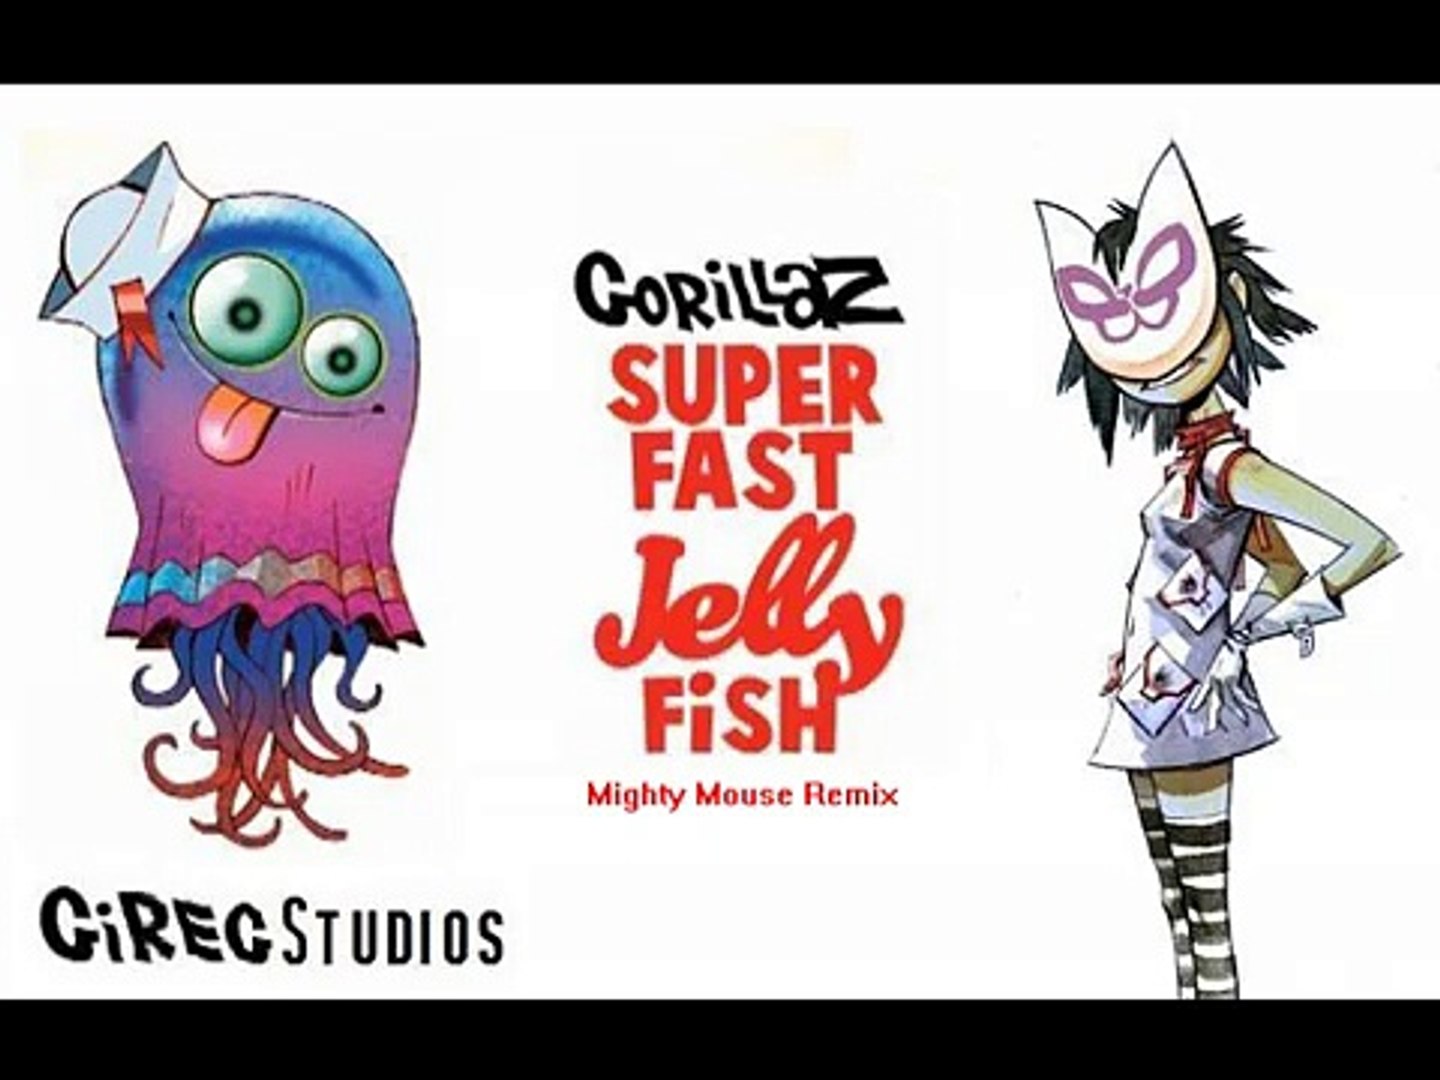 Gorillaz - Superfast Jellyfish (Mighty Mouse Remix)